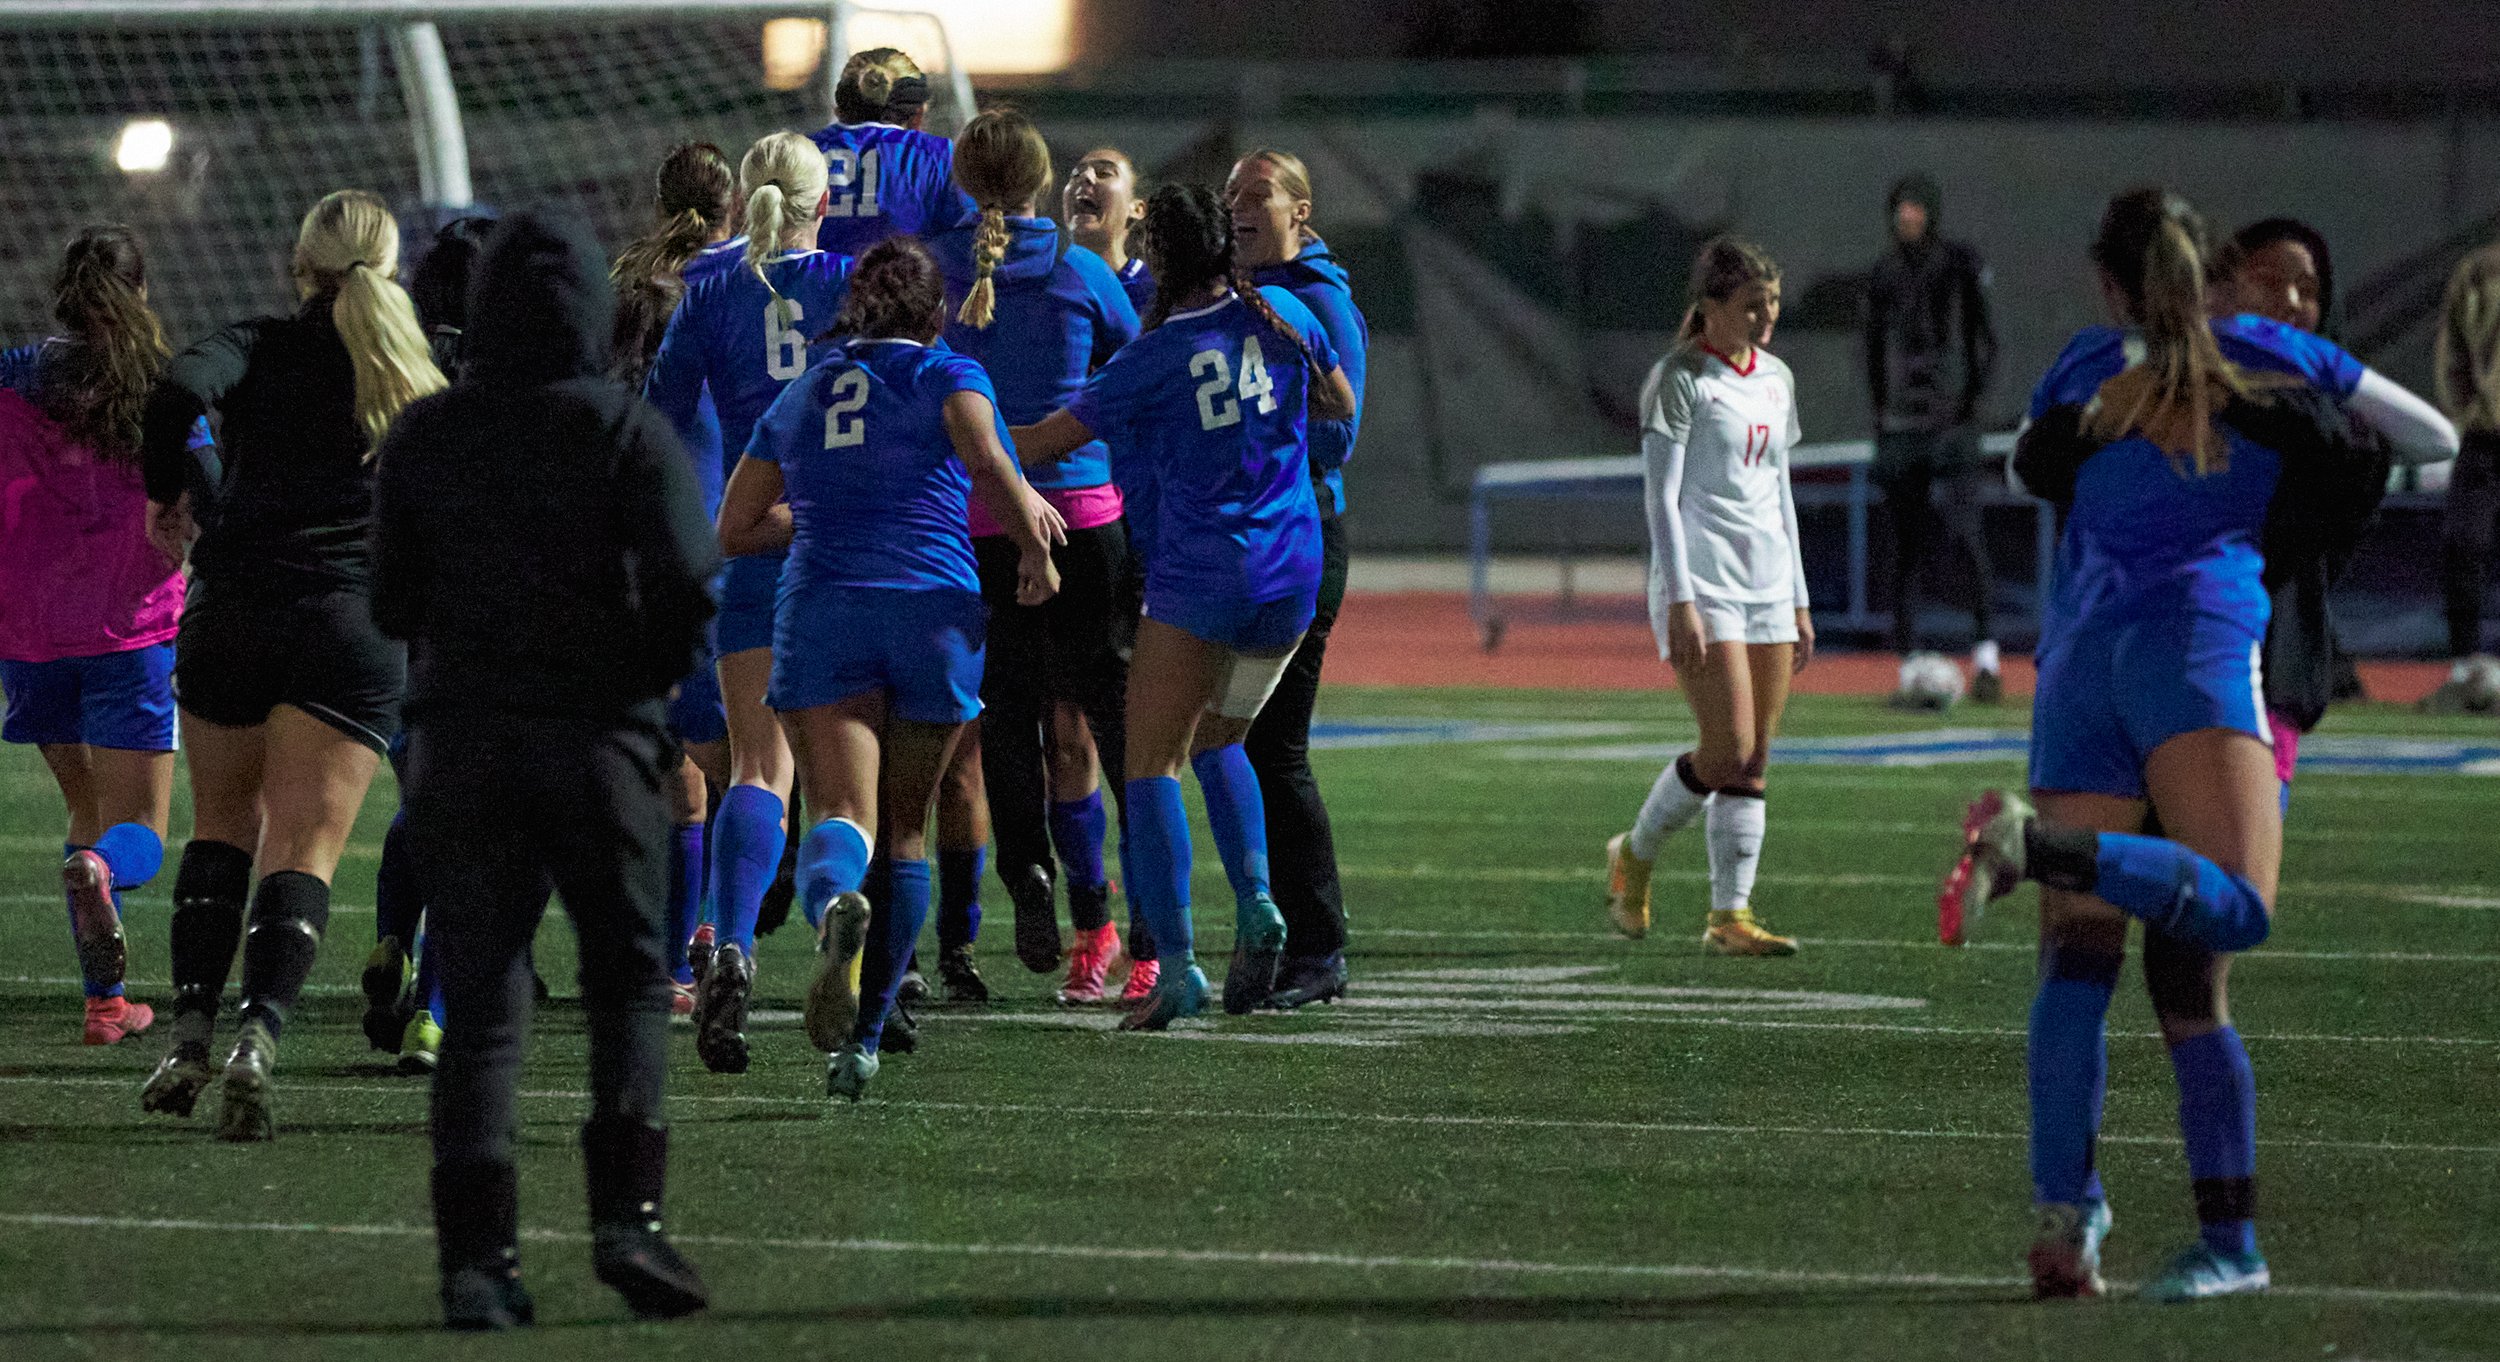  Bakersfield College Renegades' Mariah Myers-Caldarella (in white) walks back to her team as the Santa Monica College Corsairs Women's Soccer team rushes the field to celebrate their 1-0 playoff win on Wednesday, Nov. 16, 2022, at Corsair Field in Sa